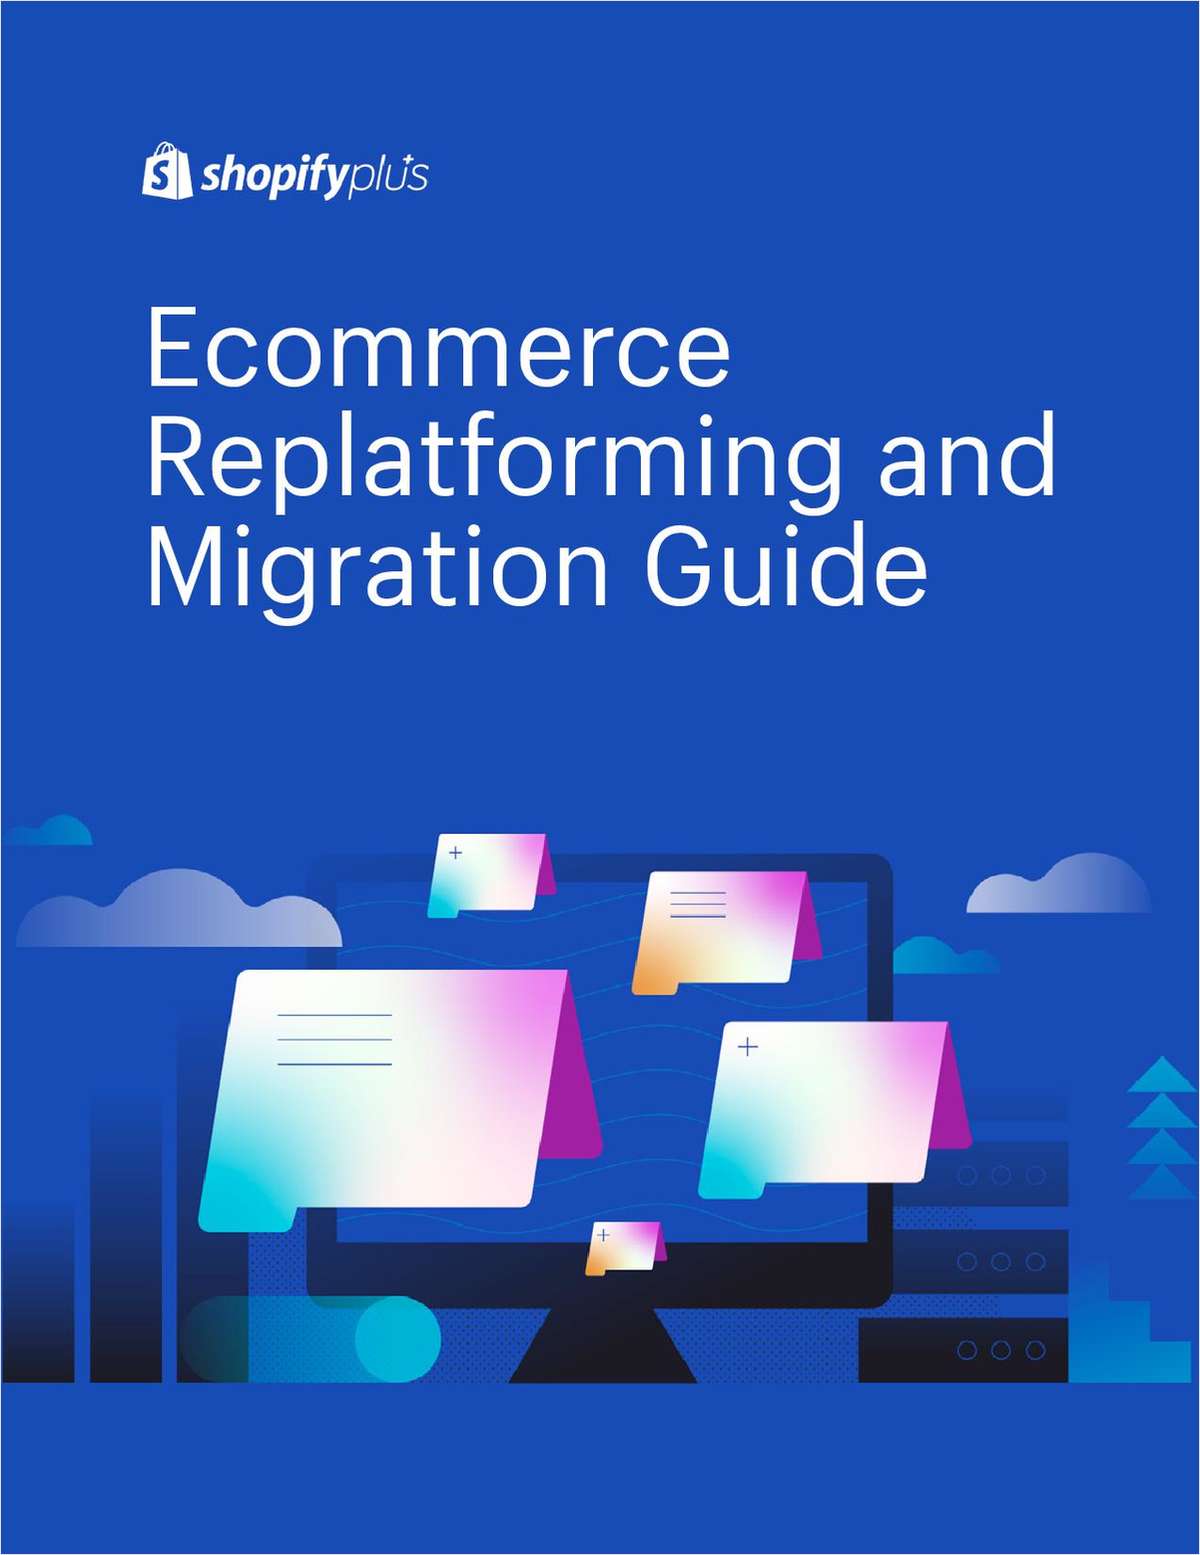 A Guide to Effectively Navigate Ecommerce Migration and Replatforming